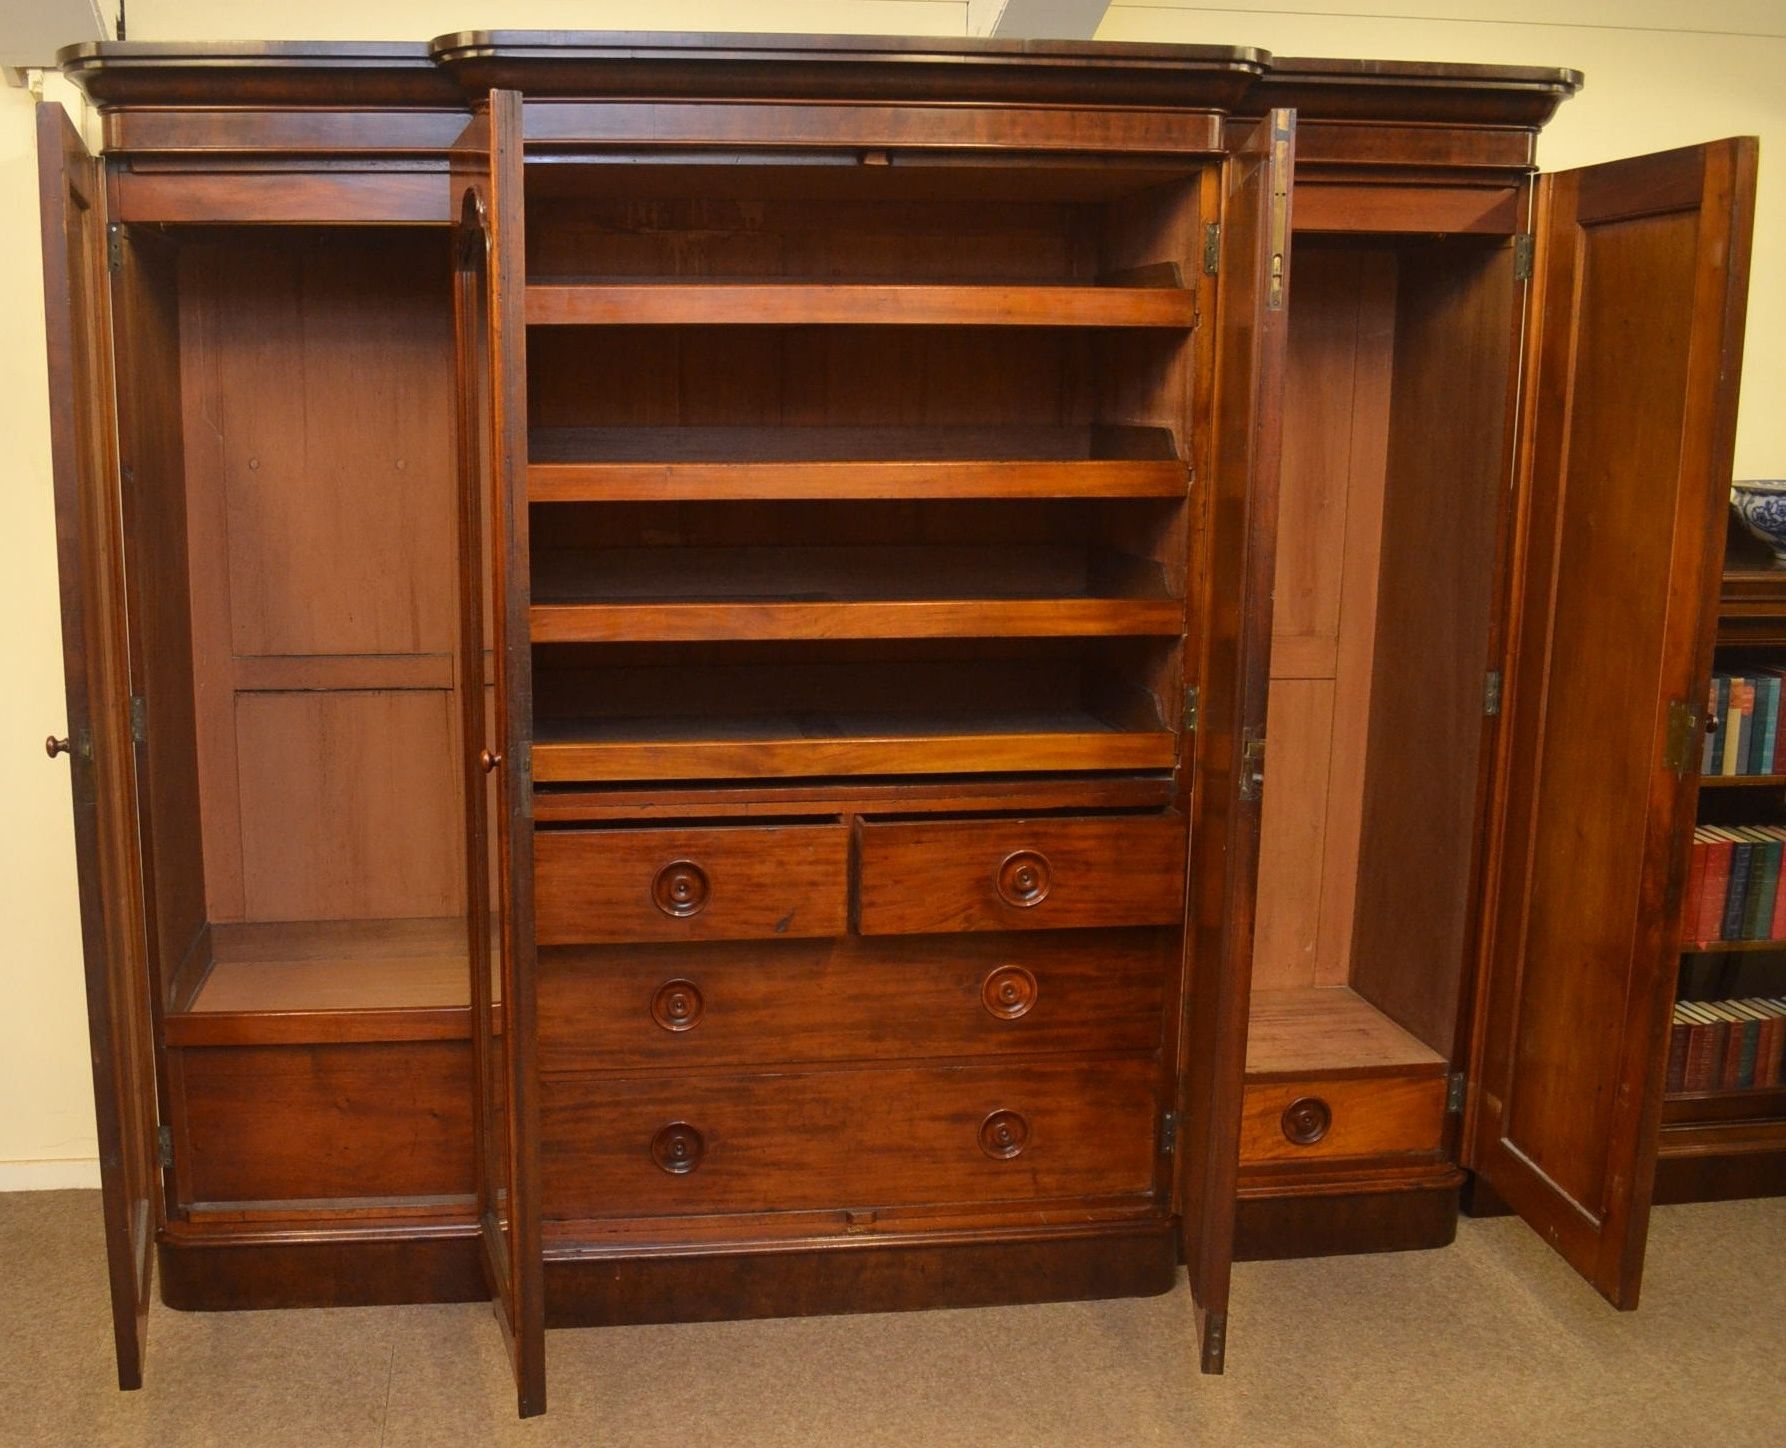 Breakfront Victorian Mahogany Wardrobe C1870 In From Quayside Antiques Throughout Preferred Victorian Mahogany Breakfront Wardrobes (View 1 of 15)